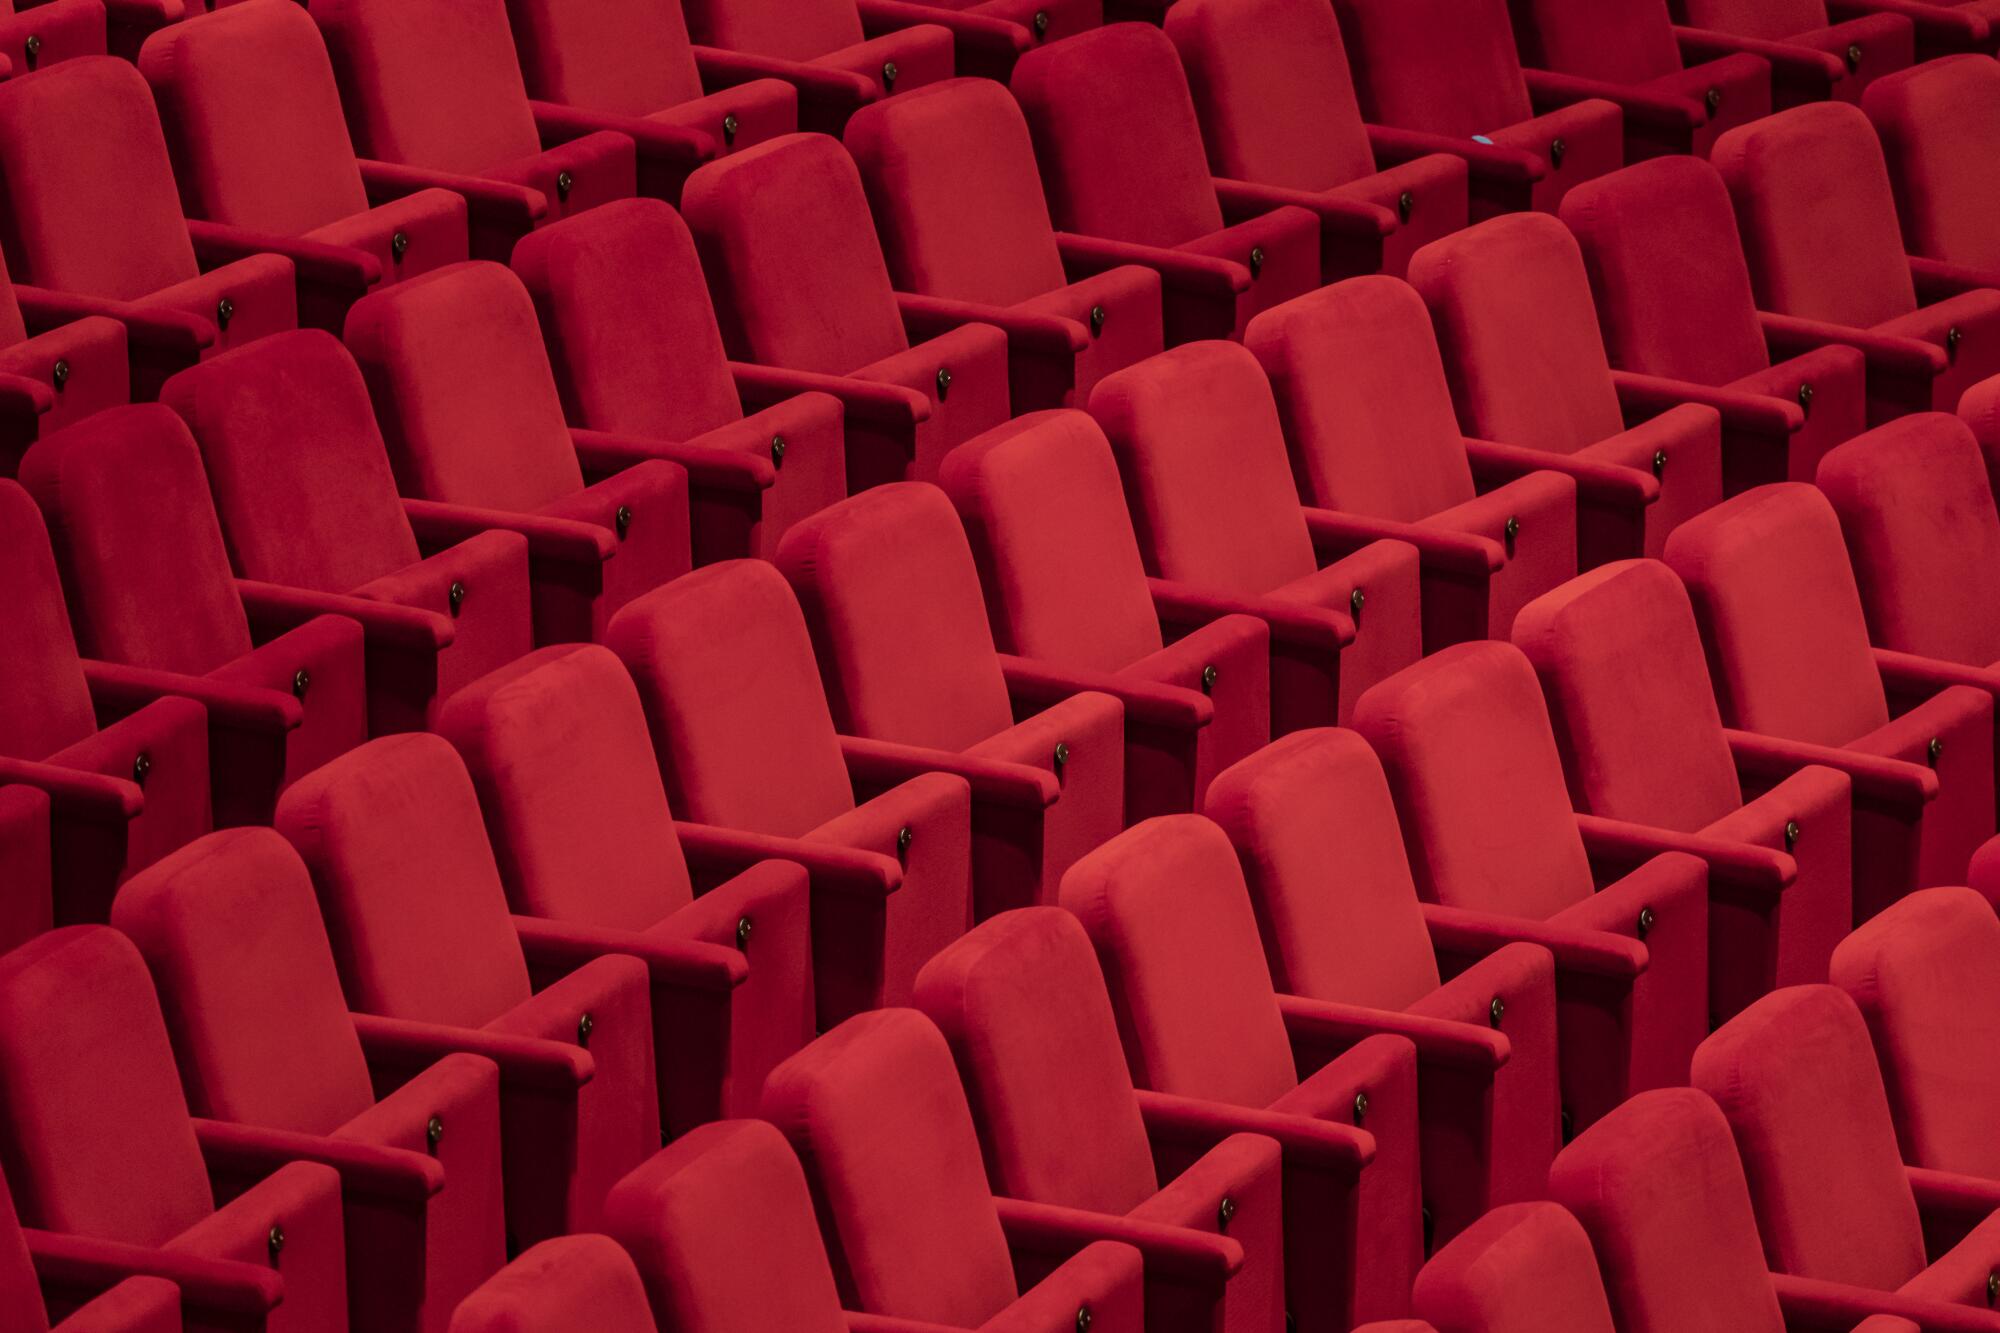 The 1,000-seat David Geffen Theater seats were meant to evoke old Hollywood glamour.